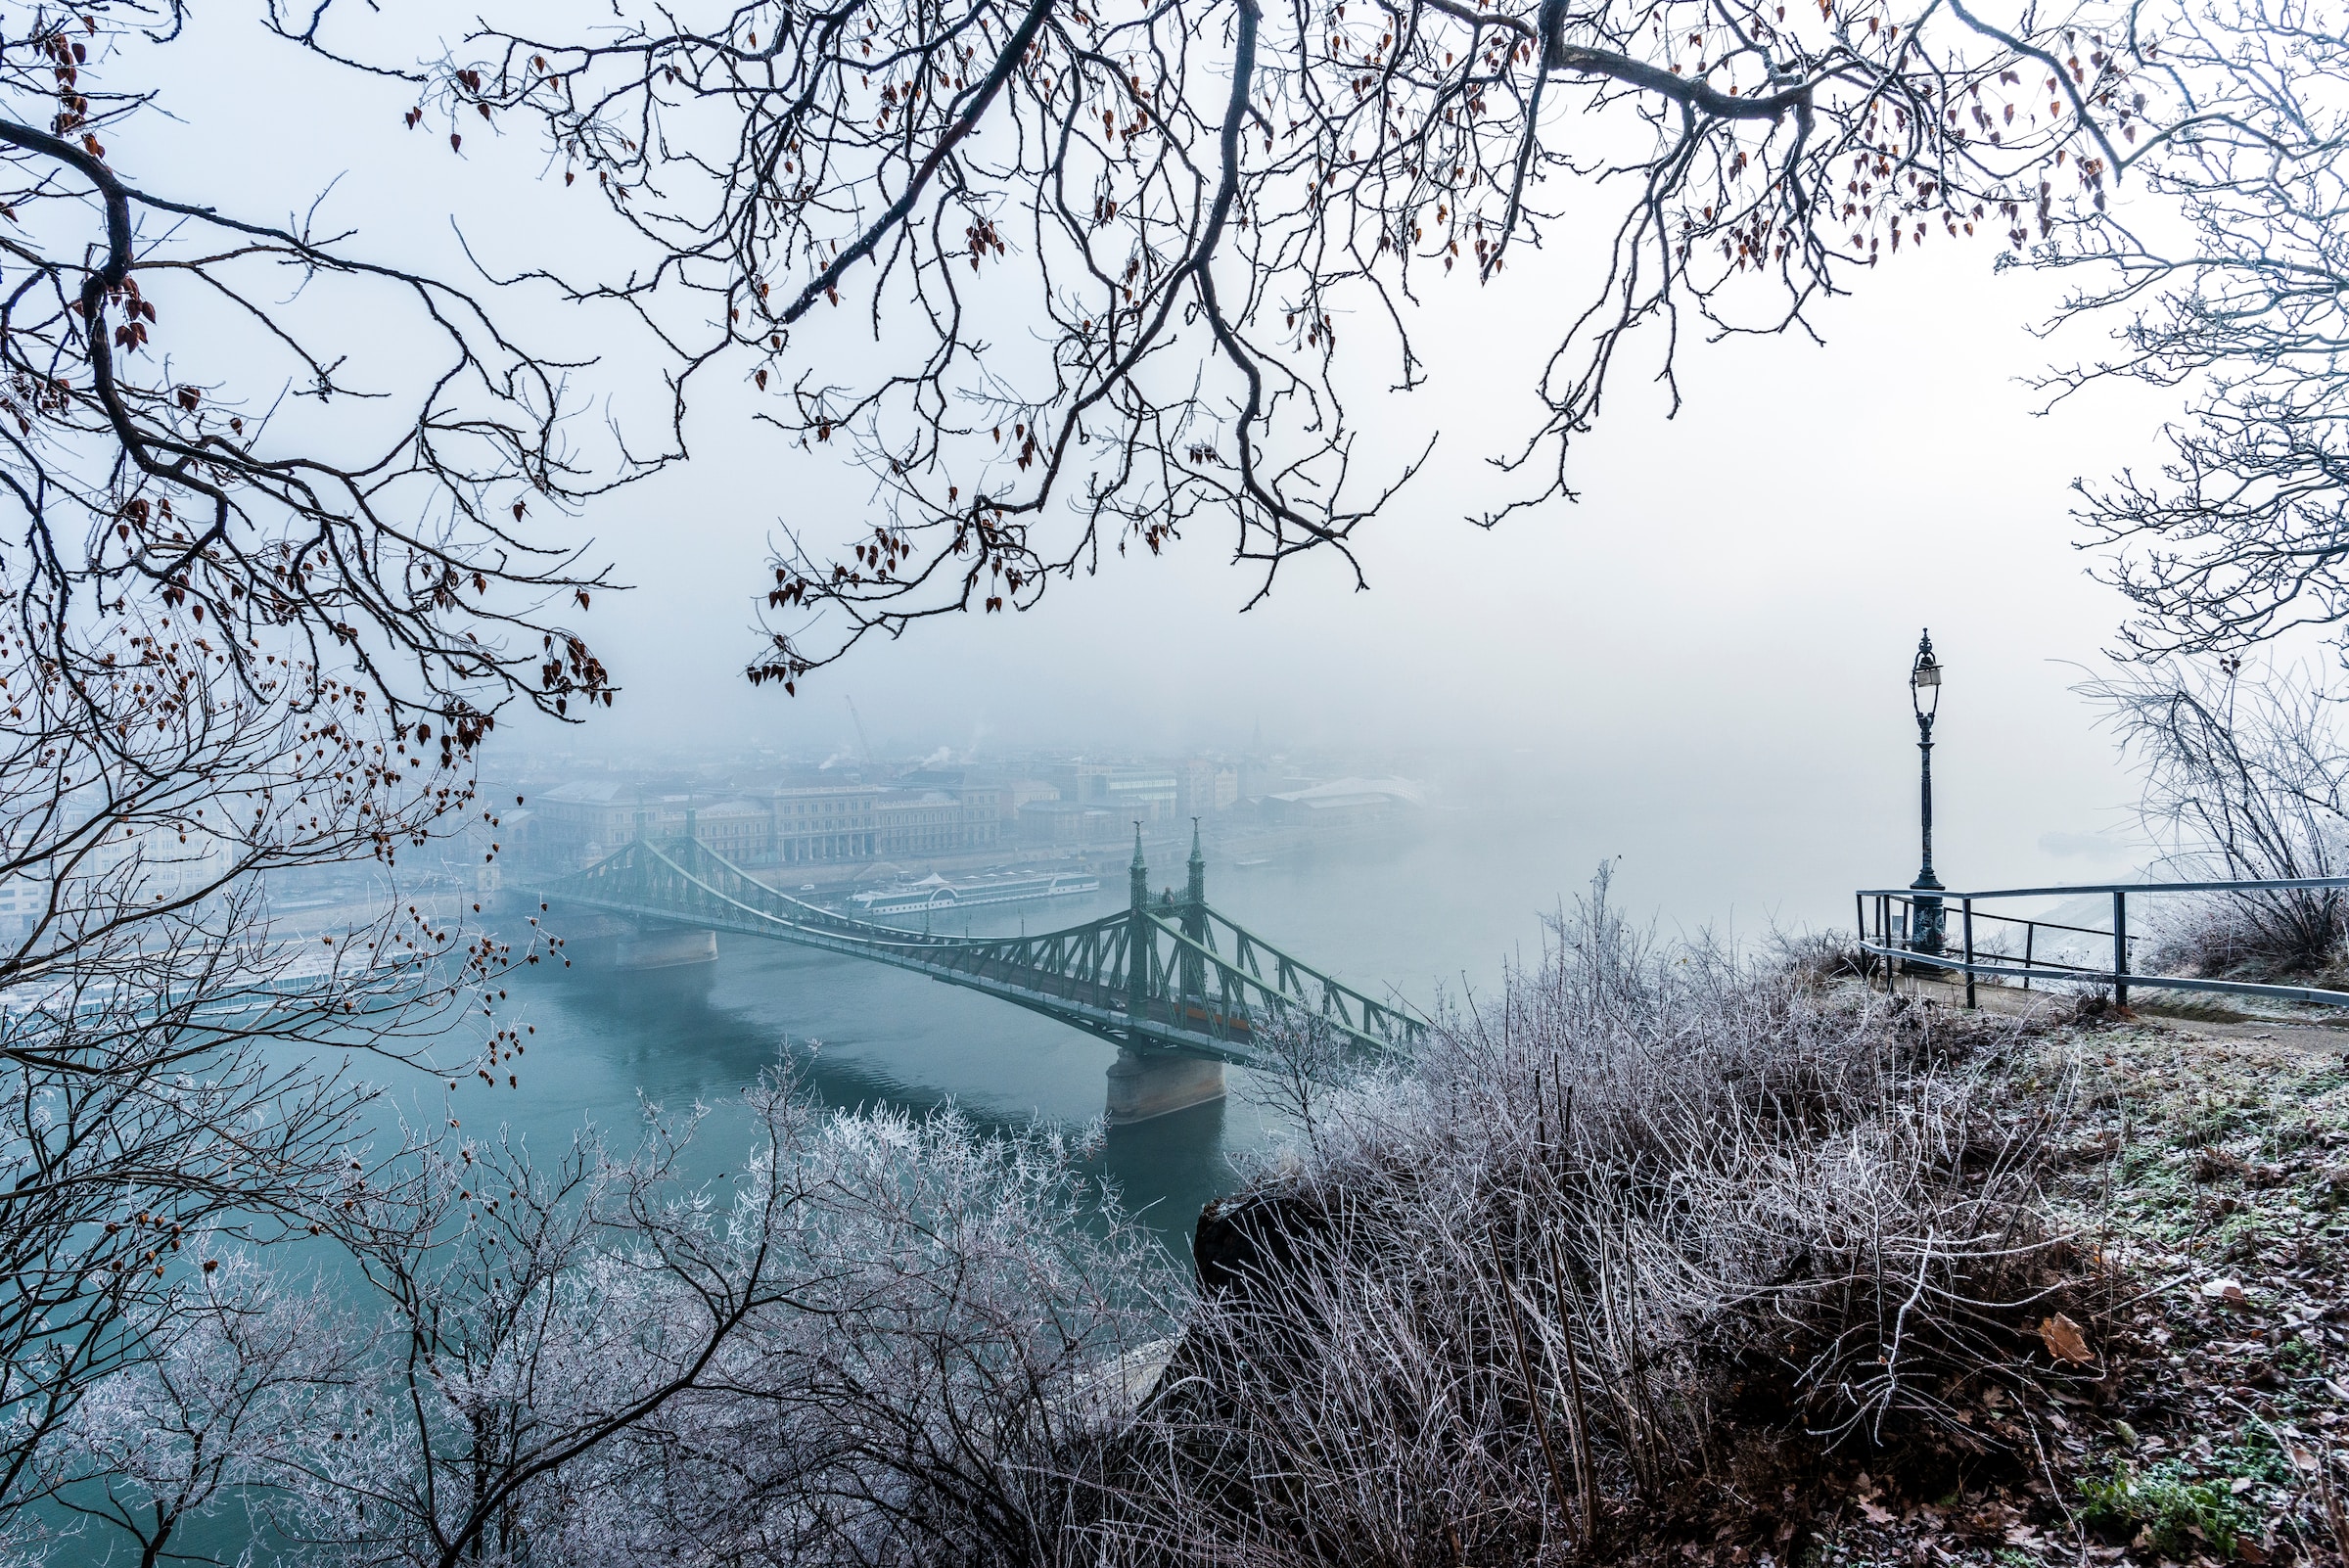 Budapest in winter with the Chain Bridge in the background